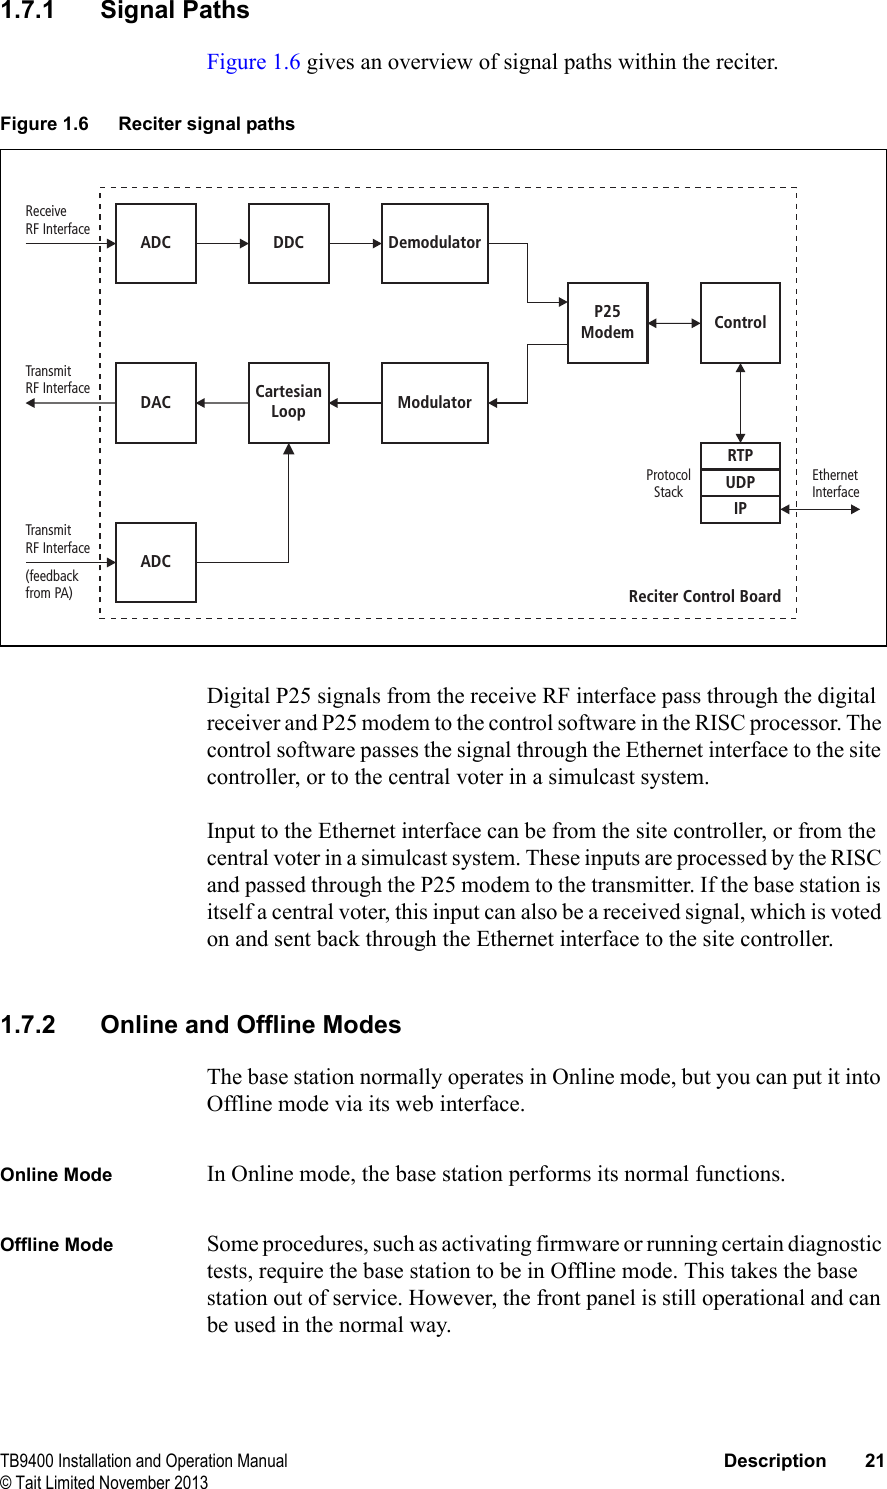  TB9400 Installation and Operation Manual Description 21© Tait Limited November 20131.7.1 Signal PathsFigure 1.6 gives an overview of signal paths within the reciter. Digital P25 signals from the receive RF interface pass through the digital receiver and P25 modem to the control software in the RISC processor. The control software passes the signal through the Ethernet interface to the site controller, or to the central voter in a simulcast system.Input to the Ethernet interface can be from the site controller, or from the central voter in a simulcast system. These inputs are processed by the RISC and passed through the P25 modem to the transmitter. If the base station is itself a central voter, this input can also be a received signal, which is voted on and sent back through the Ethernet interface to the site controller.1.7.2 Online and Offline ModesThe base station normally operates in Online mode, but you can put it into Offline mode via its web interface.Online Mode In Online mode, the base station performs its normal functions. Offline Mode Some procedures, such as activating firmware or running certain diagnostic tests, require the base station to be in Offline mode. This takes the base station out of service. However, the front panel is still operational and can be used in the normal way. Figure 1.6 Reciter signal pathsModulatorDemodulatorP25ModemCartesianLoopControlADCADCDDCDACRTPUDPIPTransmitRF InterfaceTransmitRF Interface(feedbackfrom PA)ReceiveRF InterfaceEthernetInterfaceProtocolStackReciter Control Board